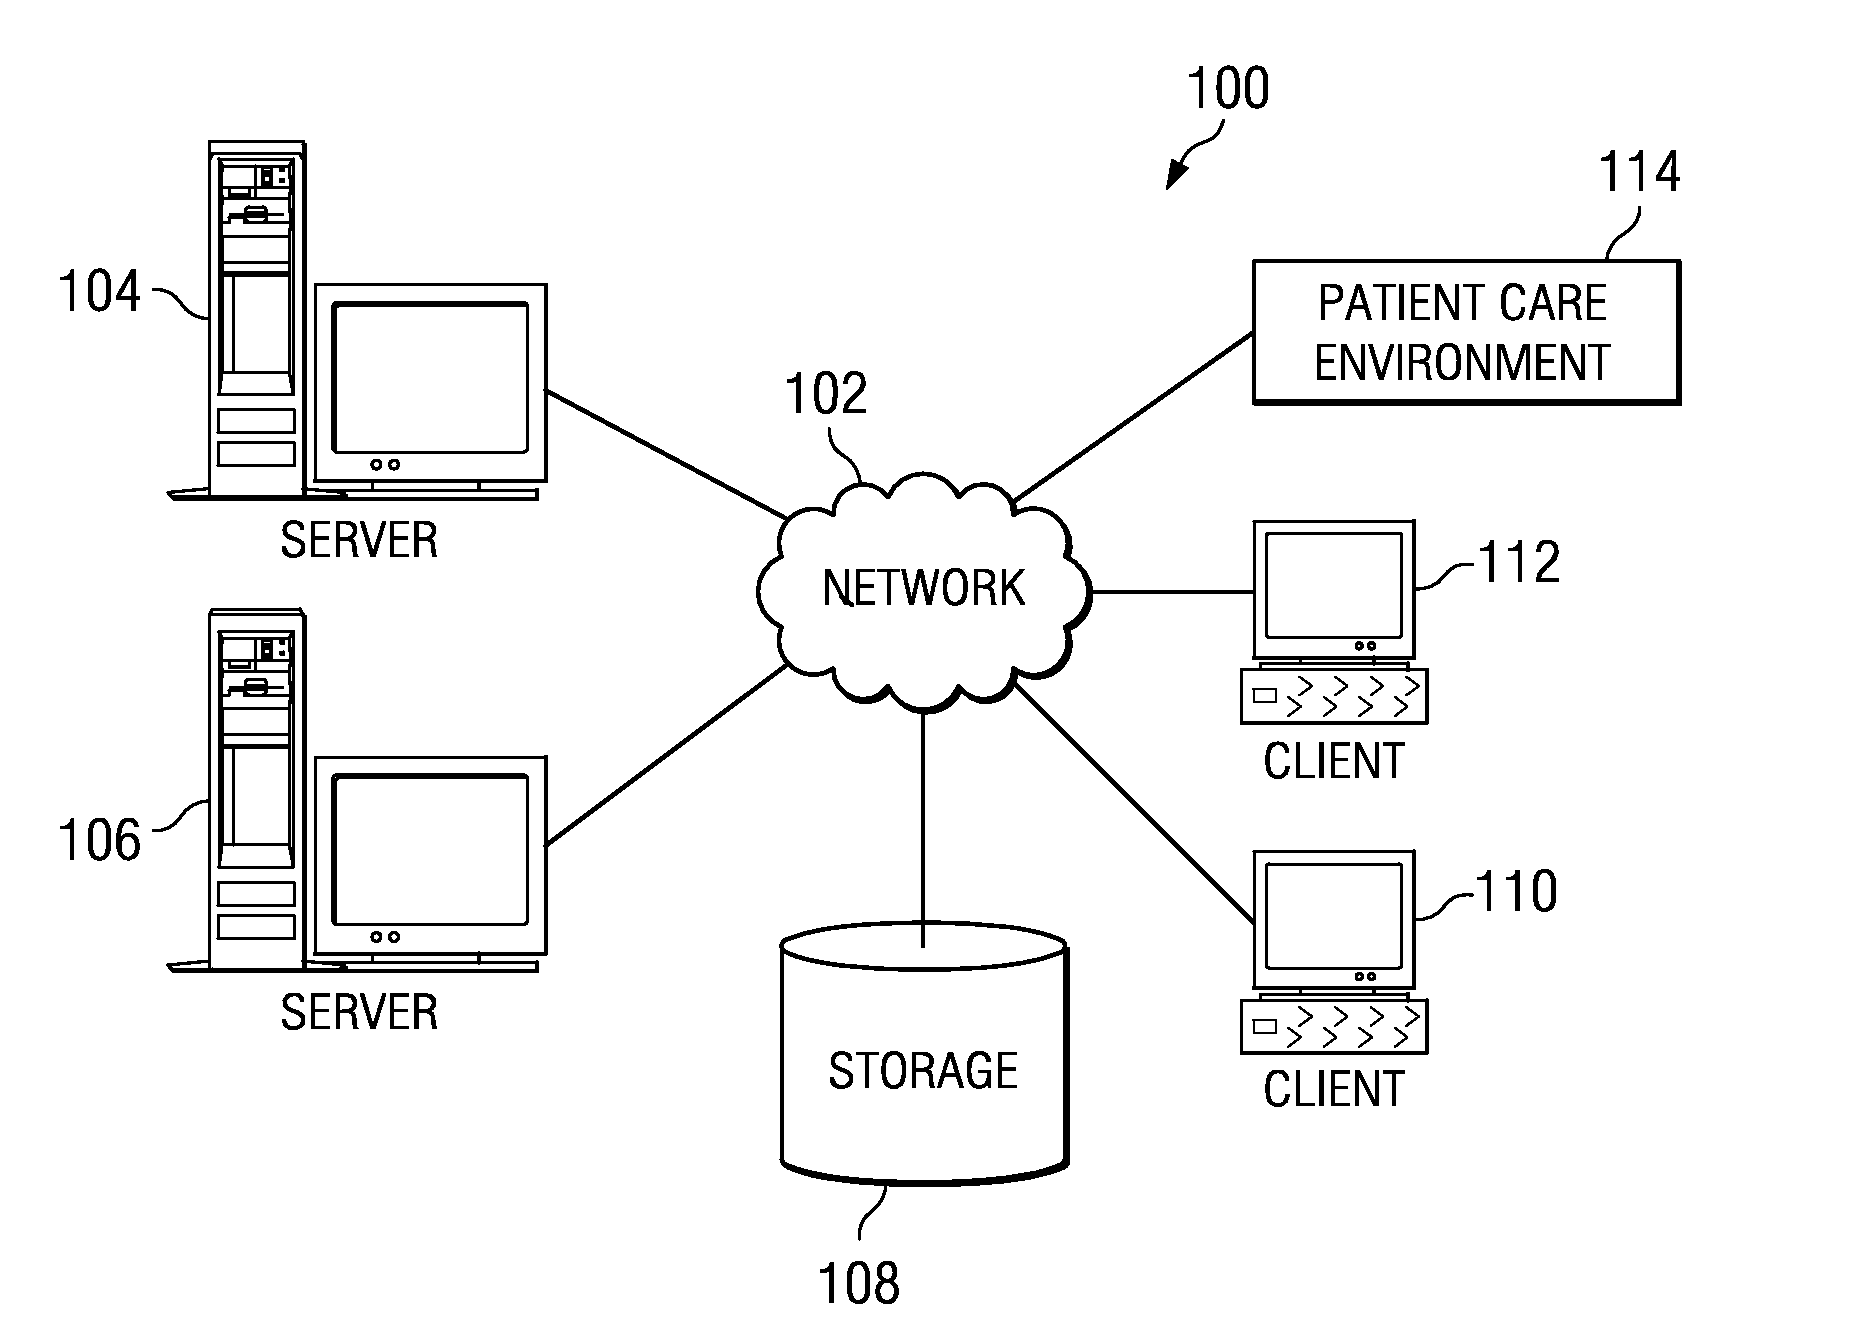 Method and apparatus for implementing digital video modeling to generate a patient risk assessment model